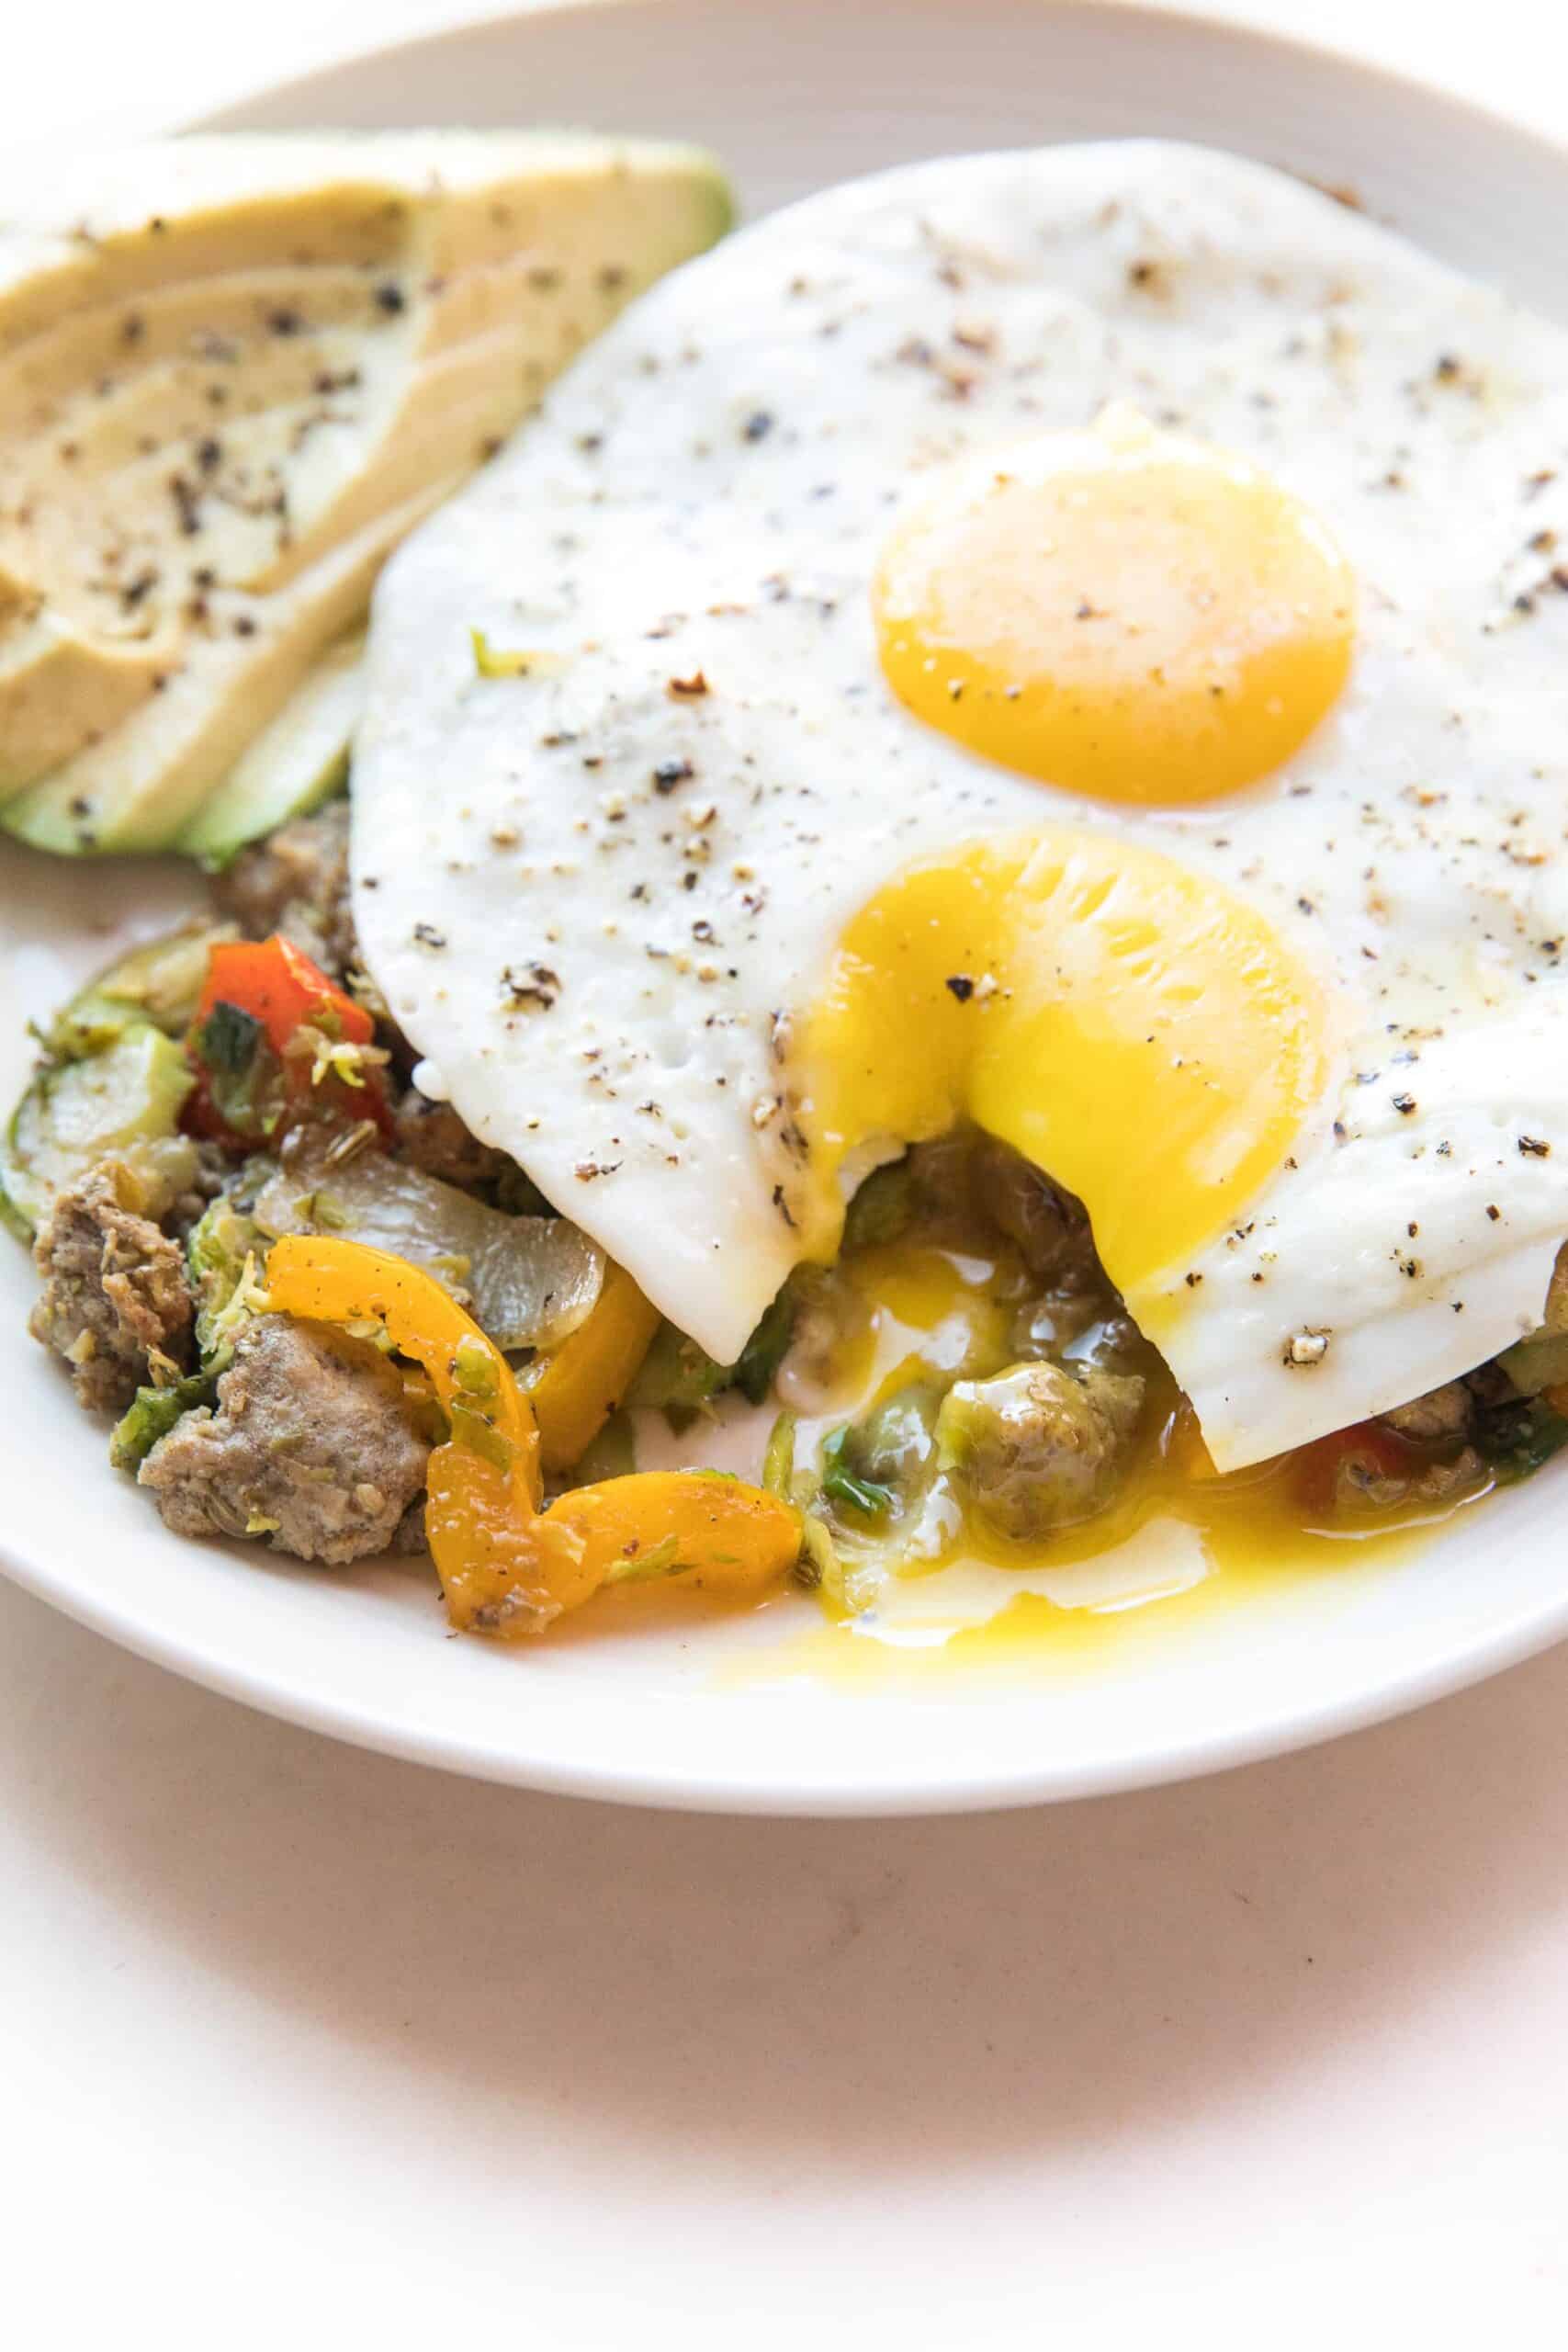 sunny side up egg yolk dripping on sausage + brussels hash